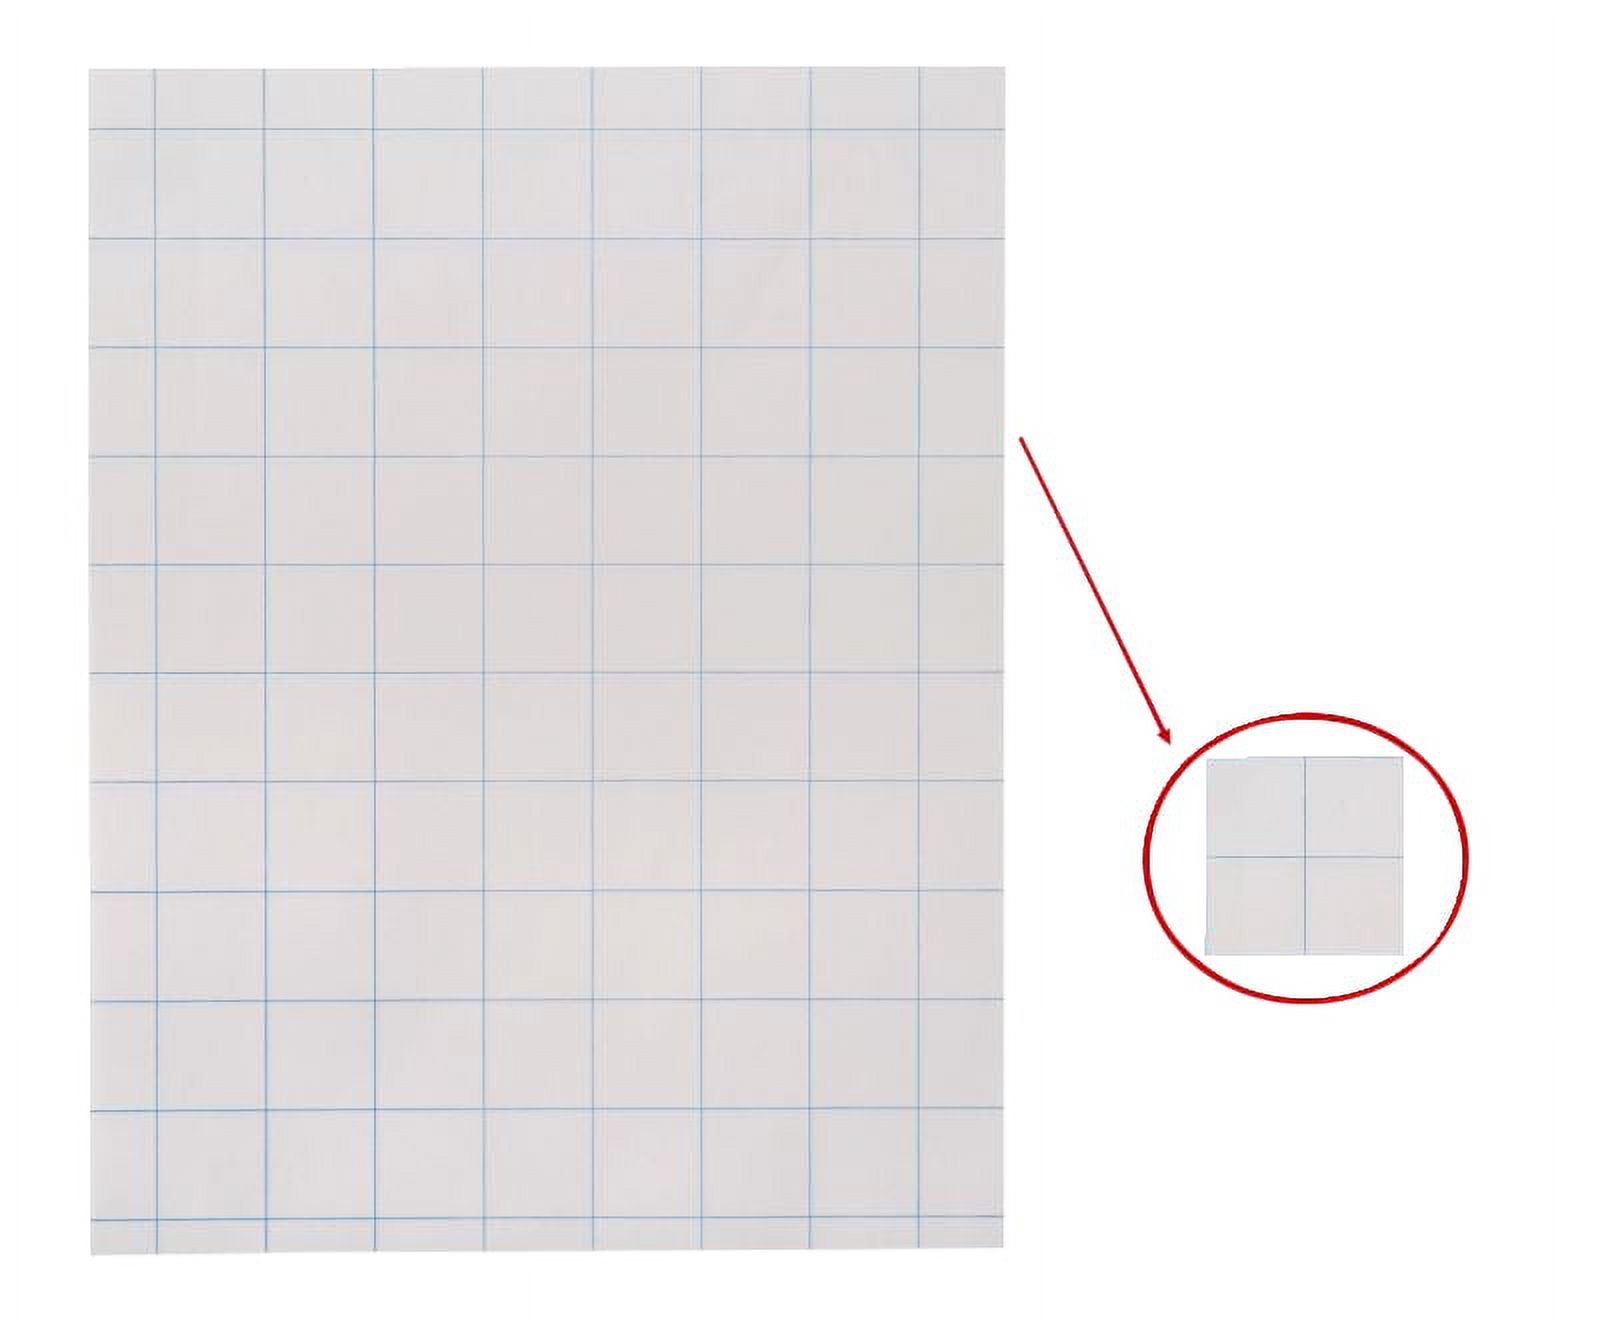 School Smart Graph Paper, 1 Inch Rule, 9 x 12 Inches, White, Pack of 500 